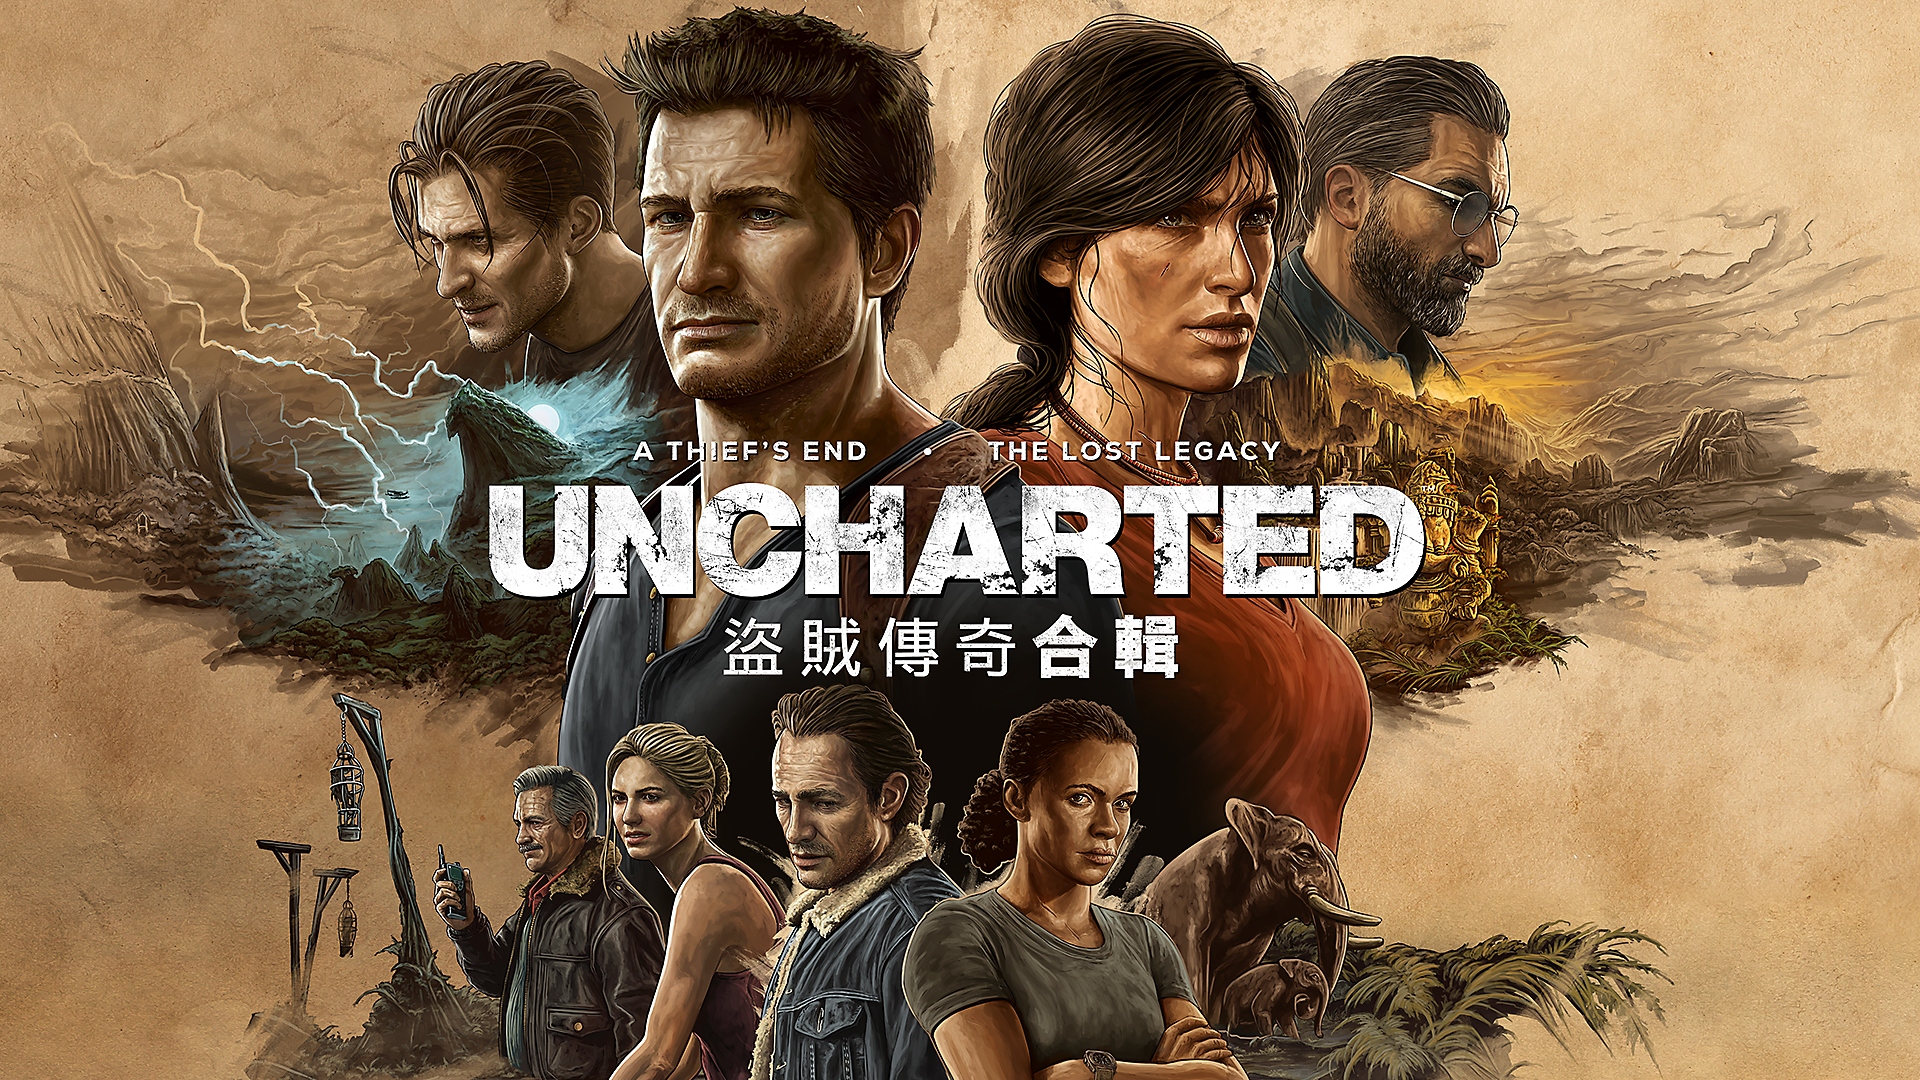 PS5《Uncharted: Legacy of Thieves Collection》預告影片 | PlayStation Showcase 2021